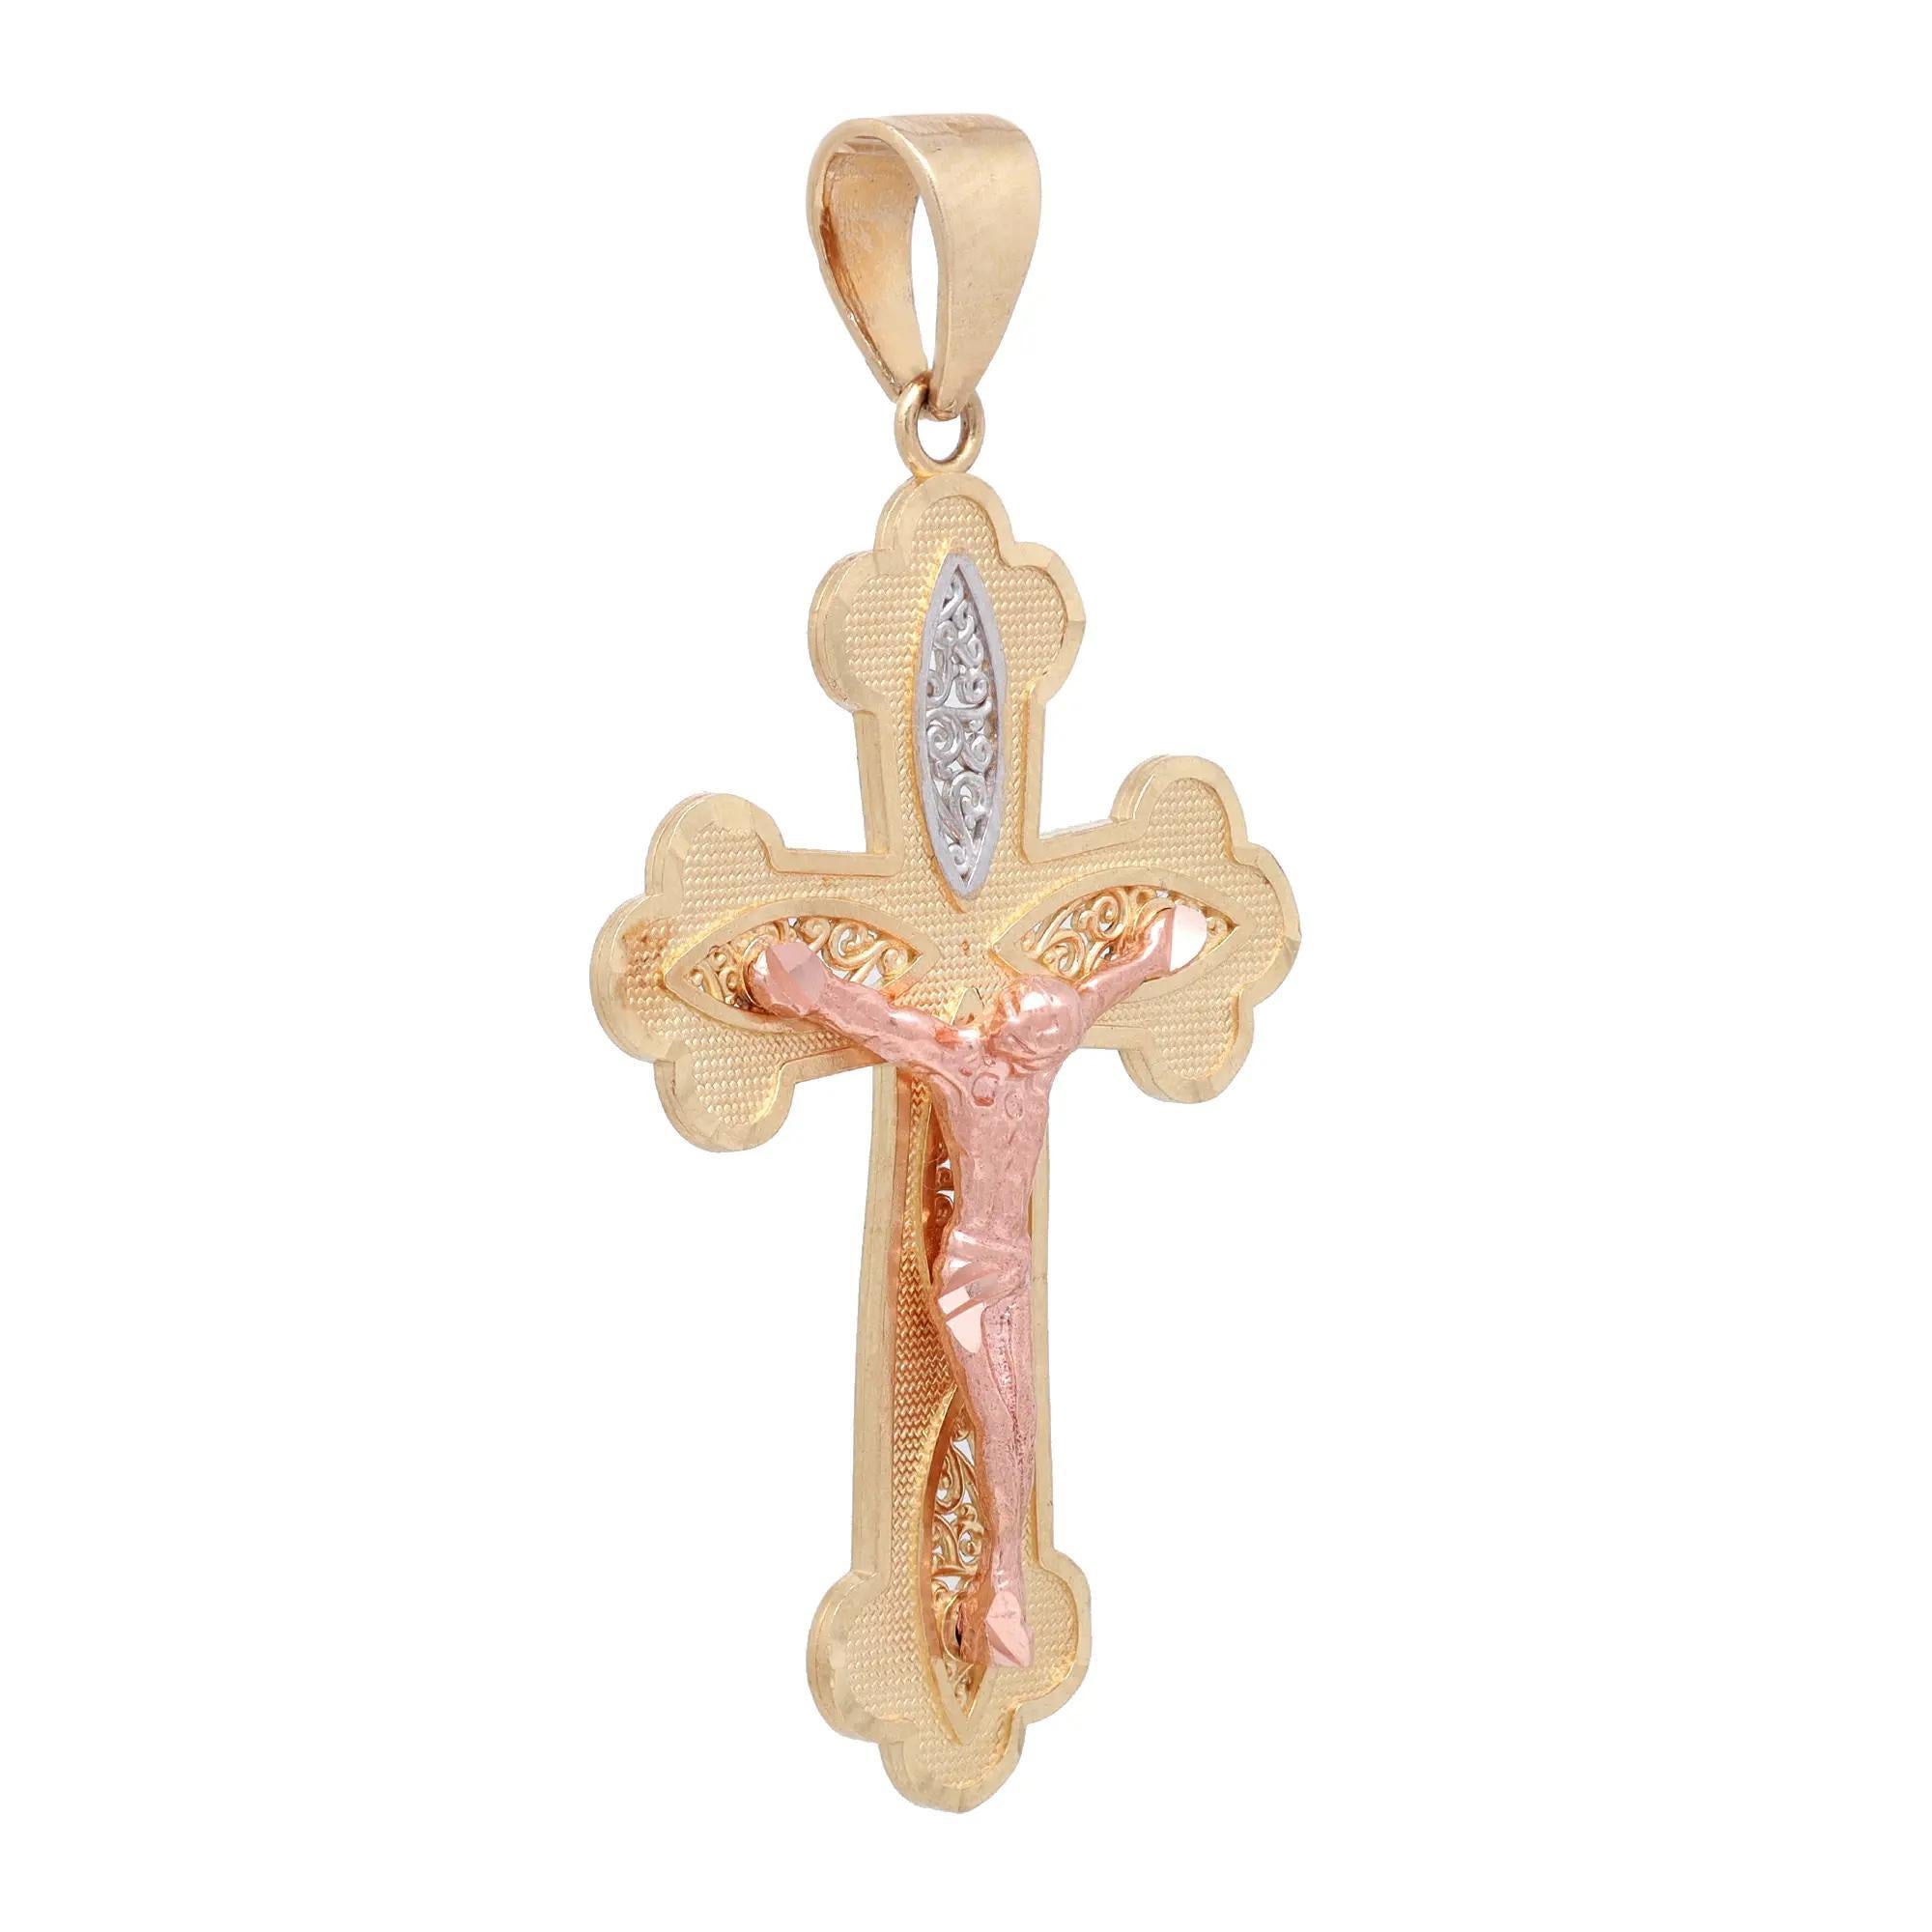 This meaningful cross pendant shines in lustrous 14K yellow, rose, and white gold. It features a crucifix filigree cross pendant in multi tone gold. Pendant size: 1.9 inches x 1 inch. Total weight: 4.20 grams. Minimalist and stylish, perfect for